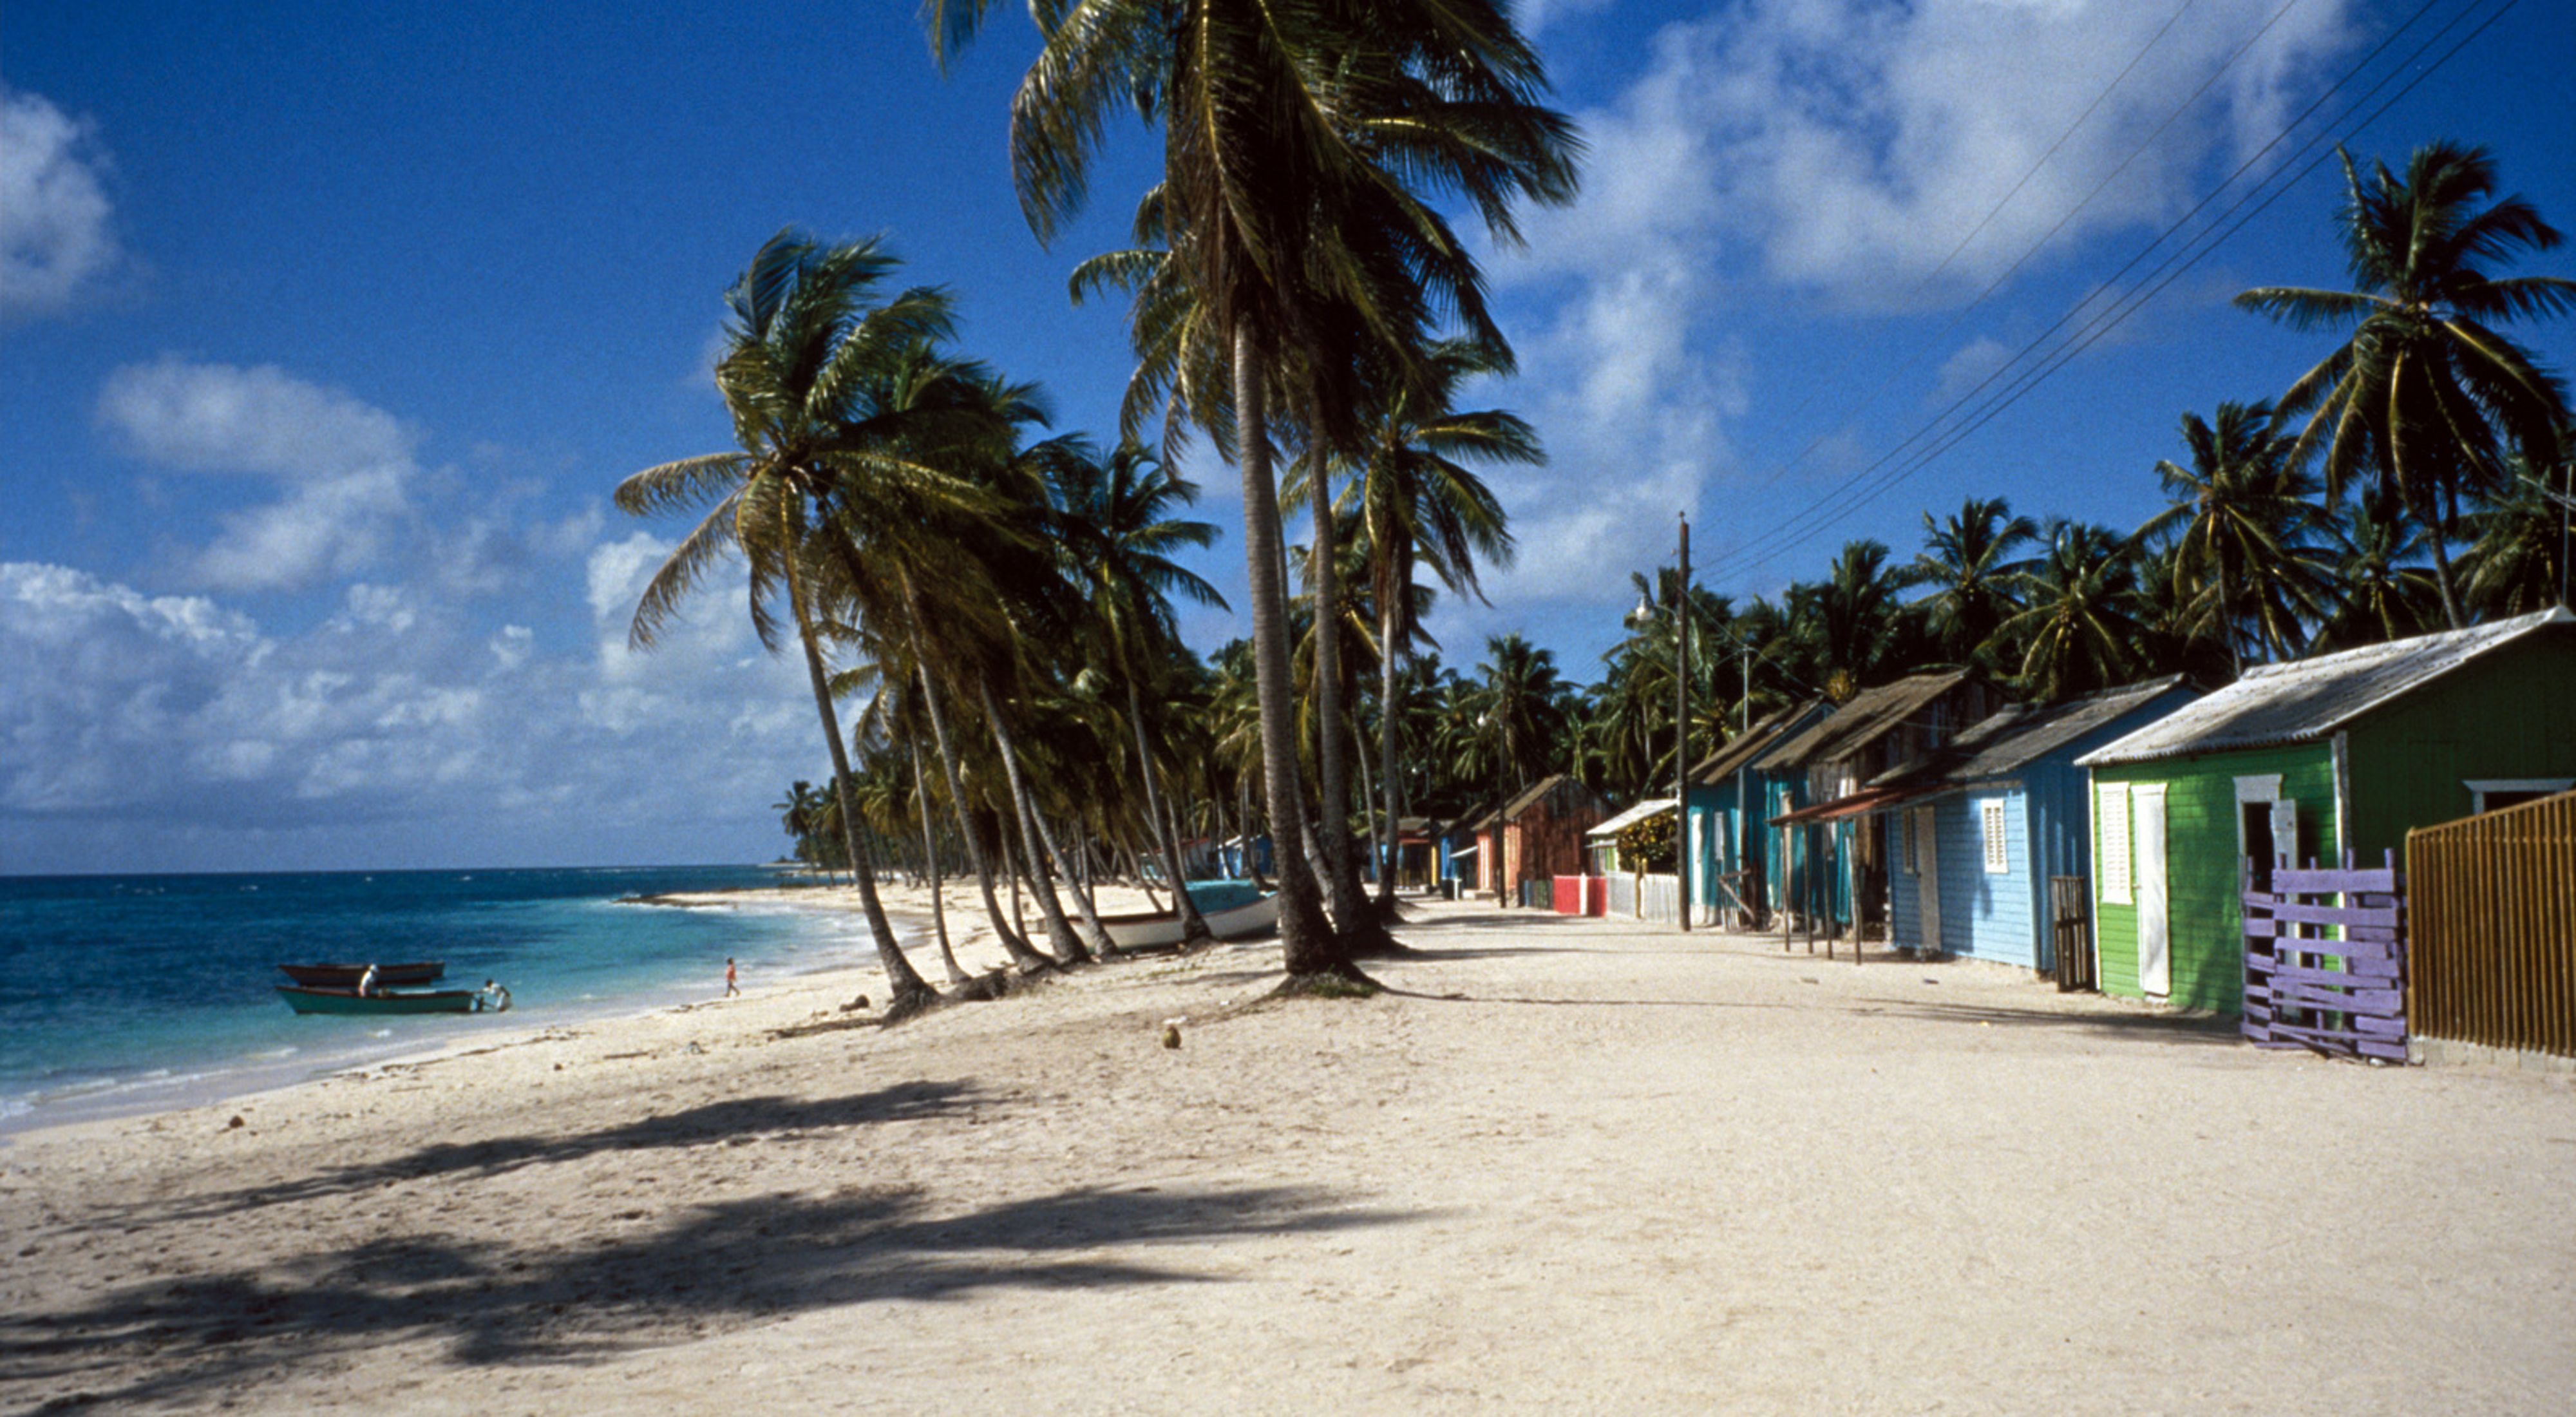 A row of colorful houses surrounded by palm trees on a white sandy beach sit beside a sparkling blue ocean.